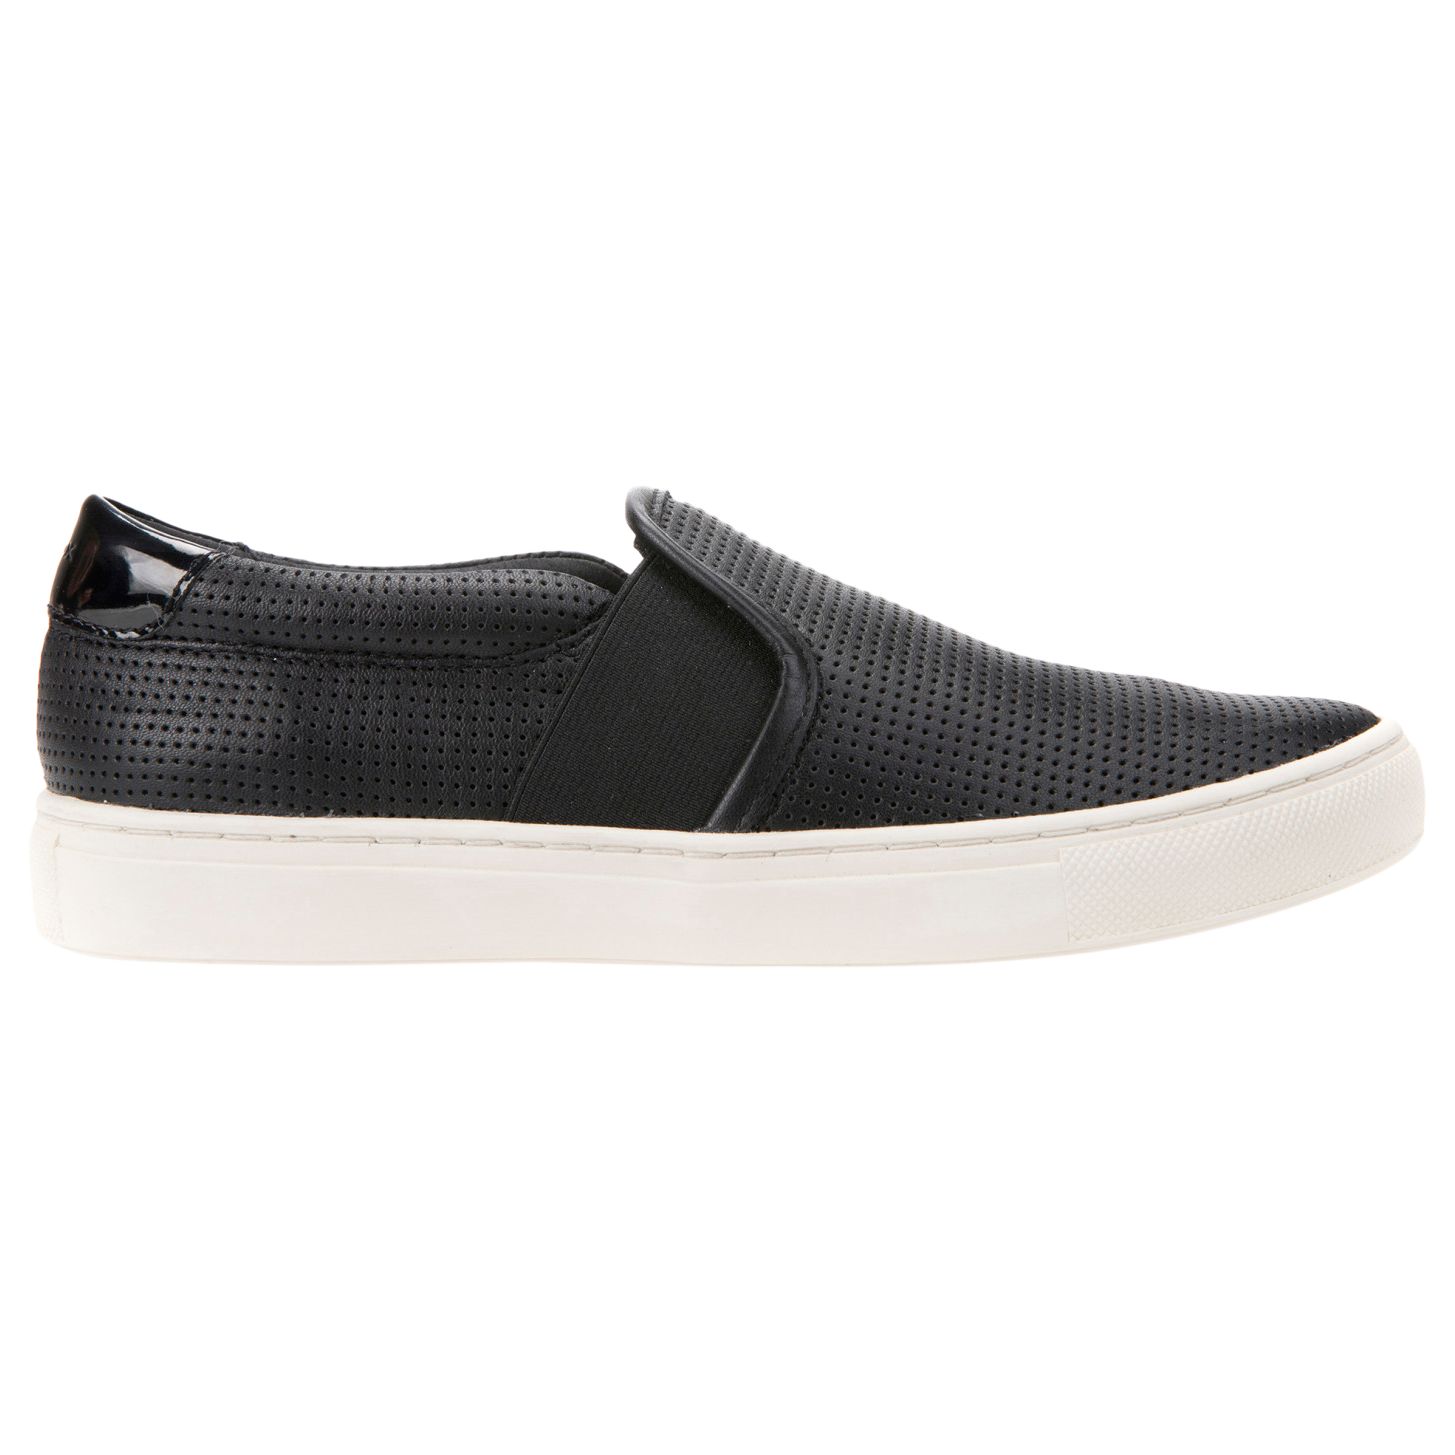 Geox Women's Trysure Leather Slip On Trainers, Black at John Lewis ...